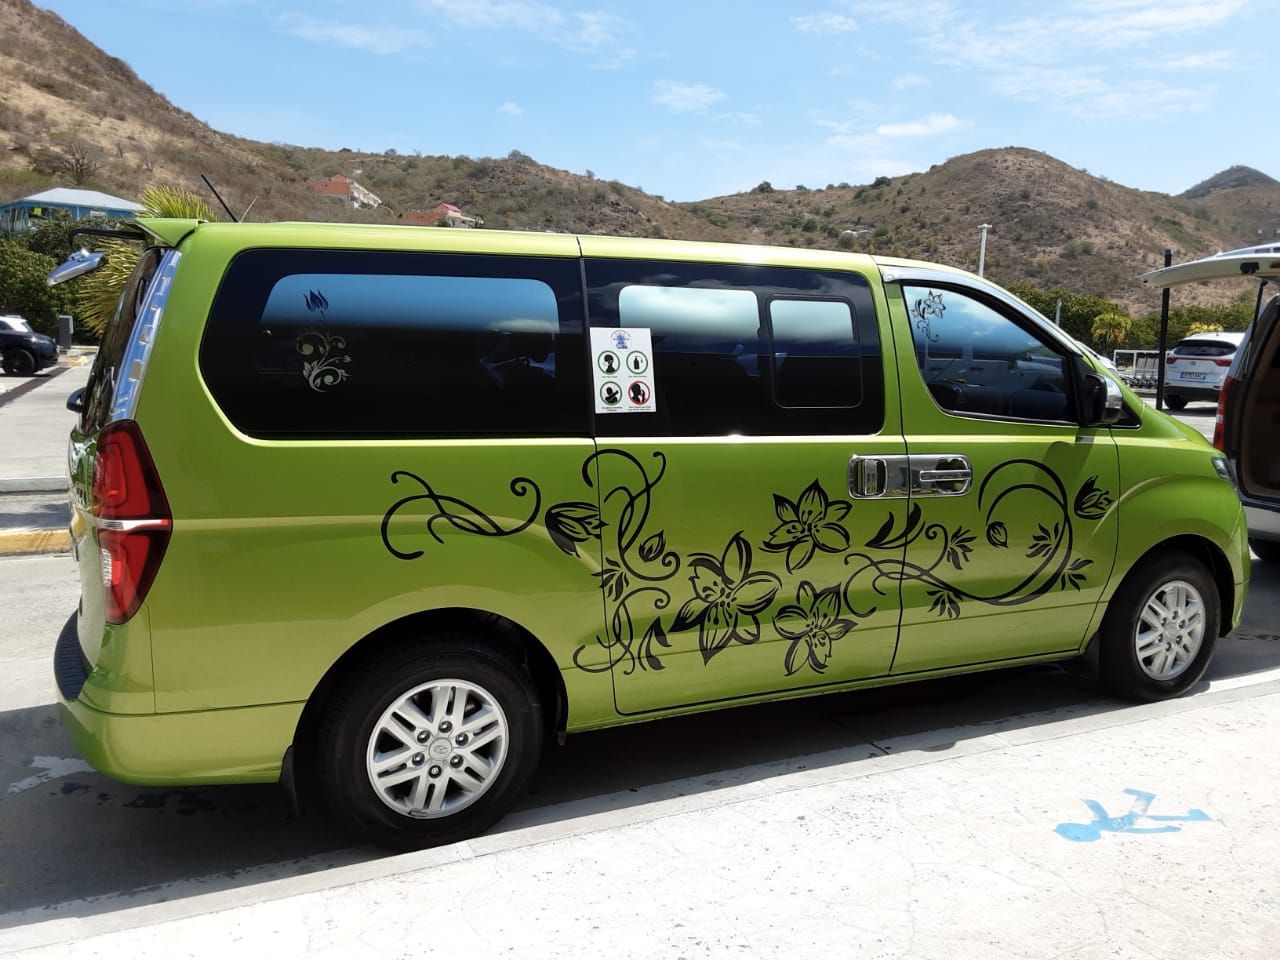 St. Marteen taxi services